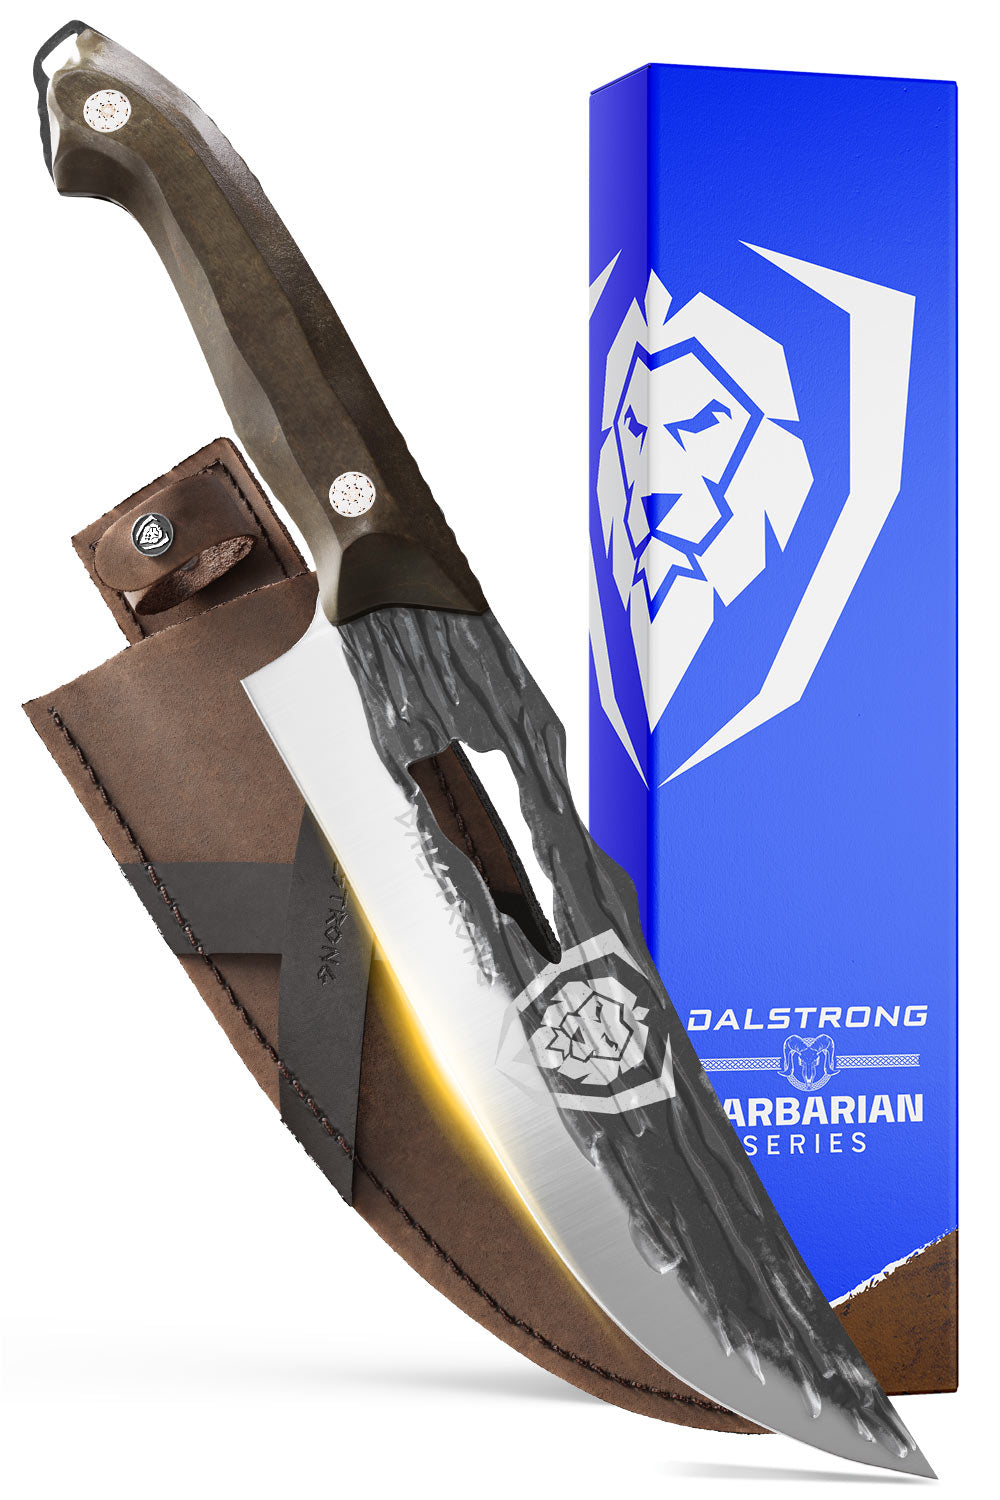 Dalstrong barbarian series 8 inch chef knife with wooden handle in front of it's premium packaging.